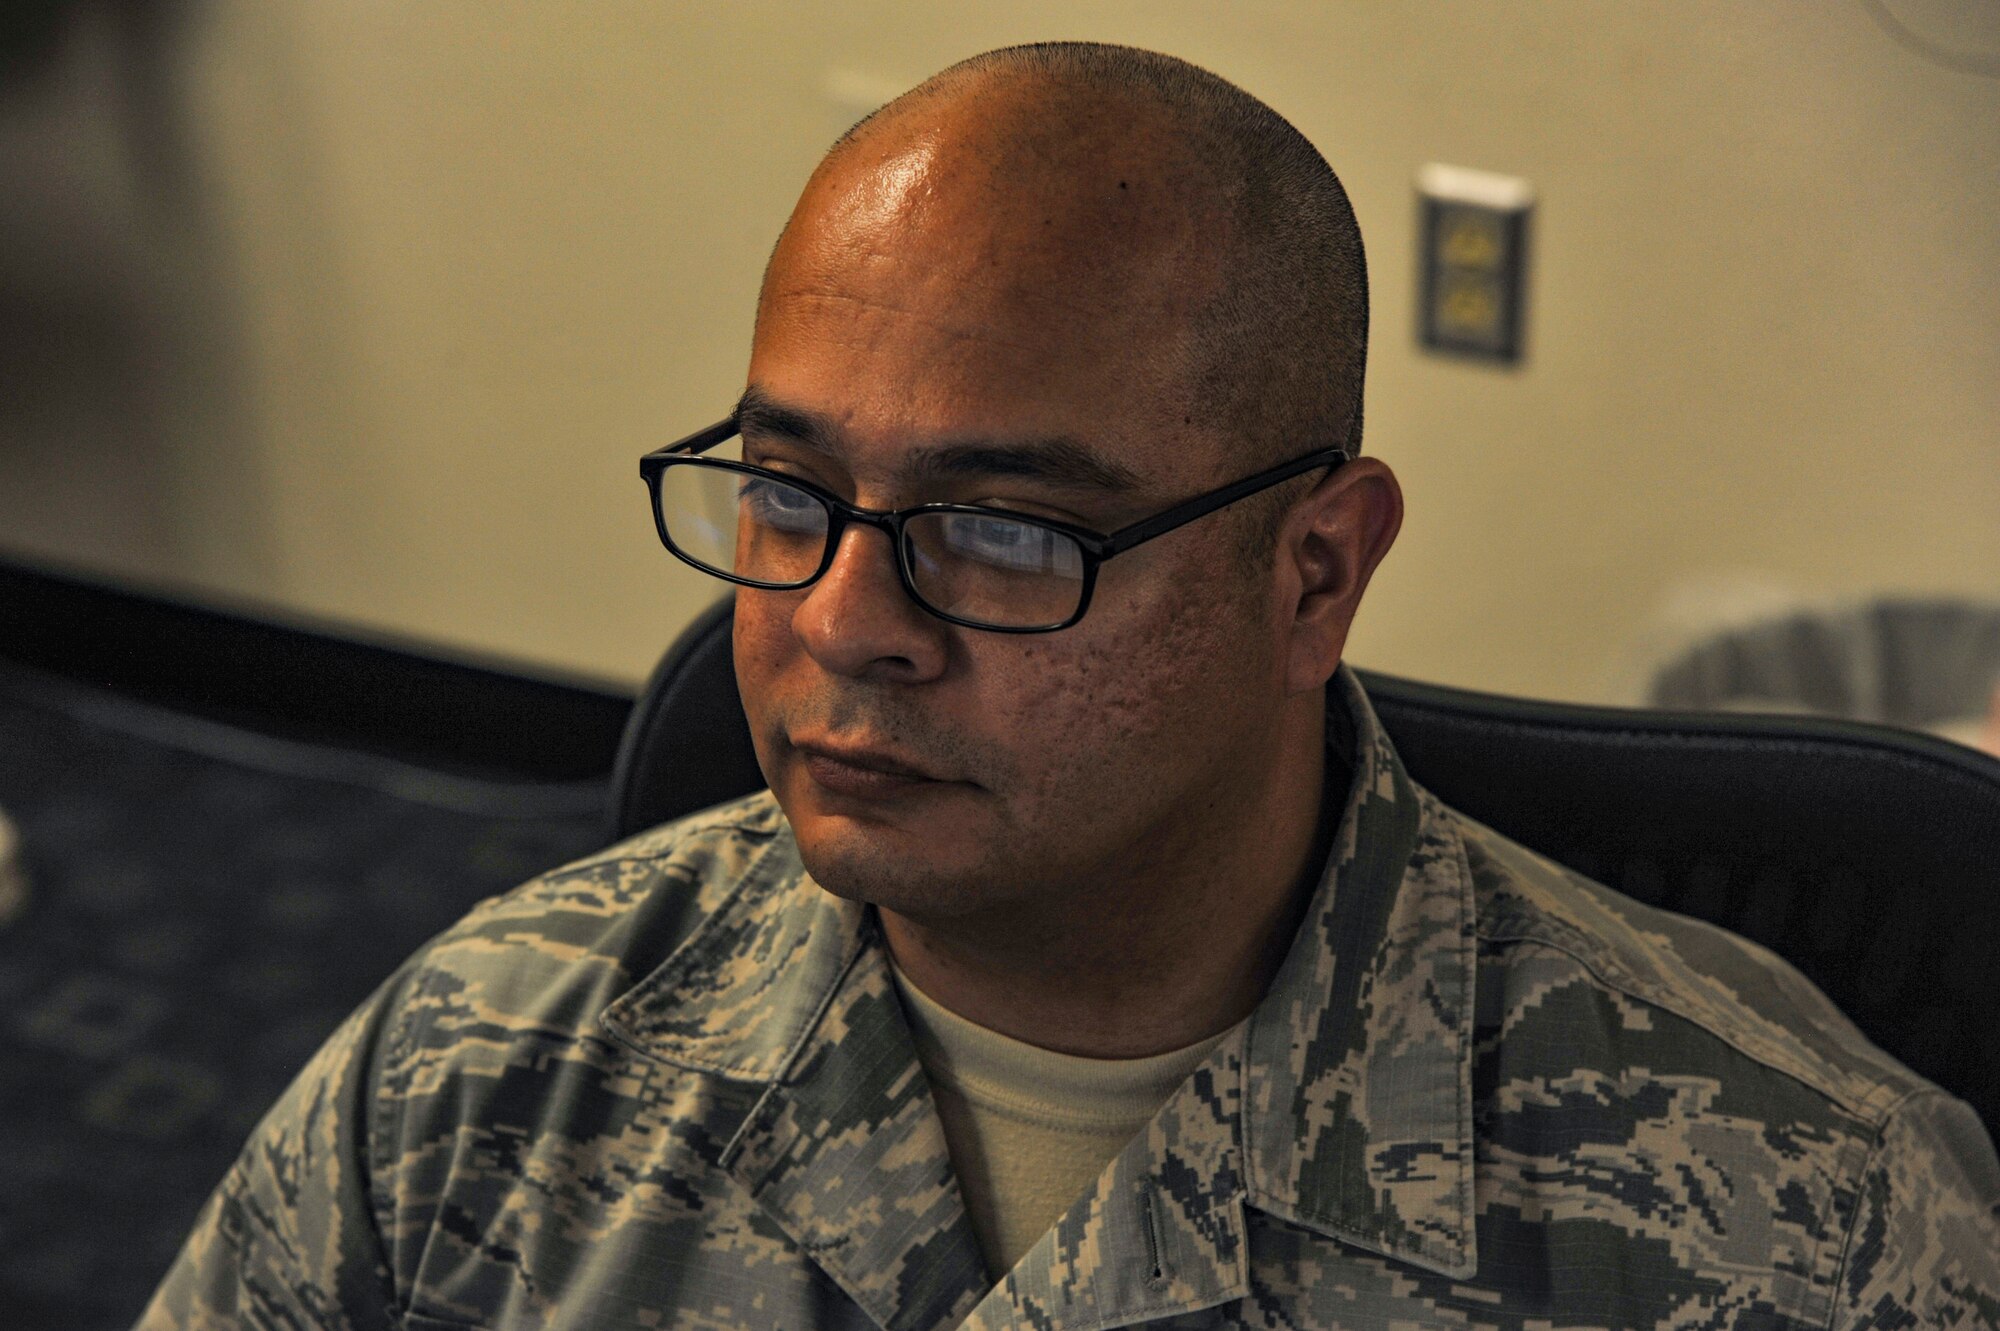 Master Sgt. Luis Sierra, flight chief for the 377th Comtroller Squadron Financial Analysis Office, crunches numbers as the end of Fiscal Year 2018 approaches. Sierra and dozens of CPTS, contracting and resource advisors across Kirtland raced to fund requirements with reallocated funds before the midnight Sept. 30 deadline. (U.S. Air Force photo by Jim Fisher)